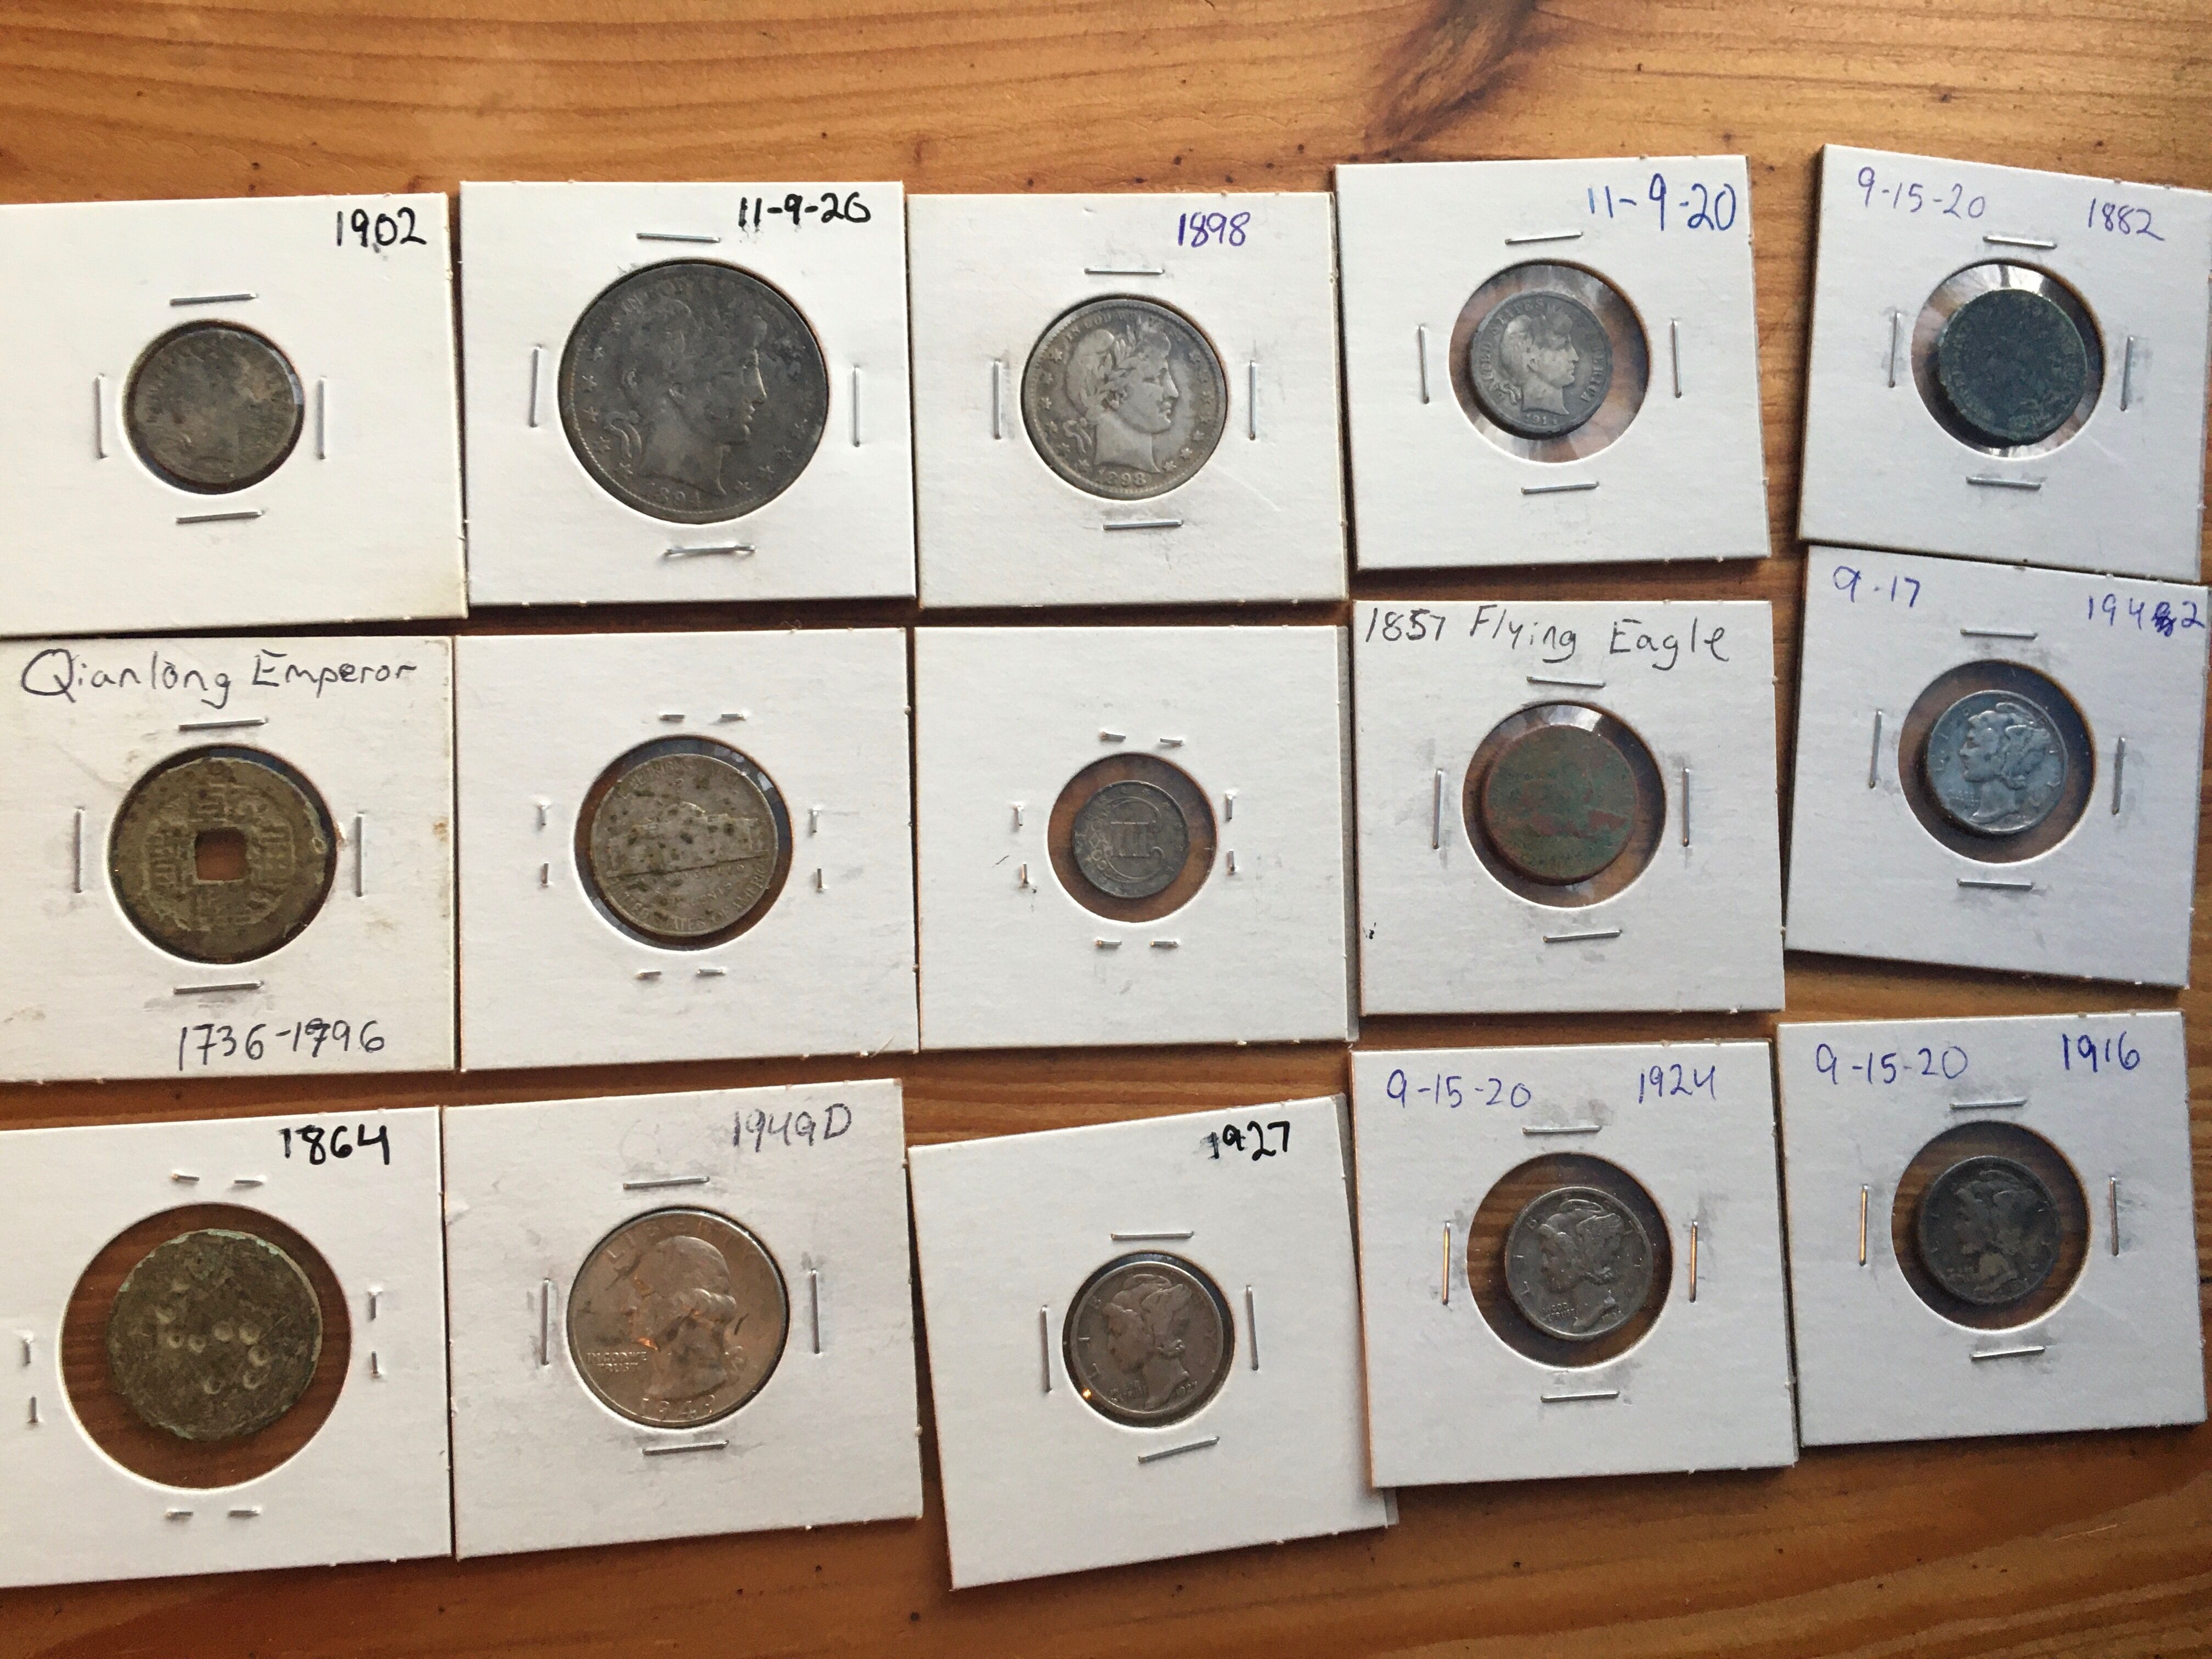 Favorite Coins and silvers of 2020 (minus silver relics and one or two washingtons)